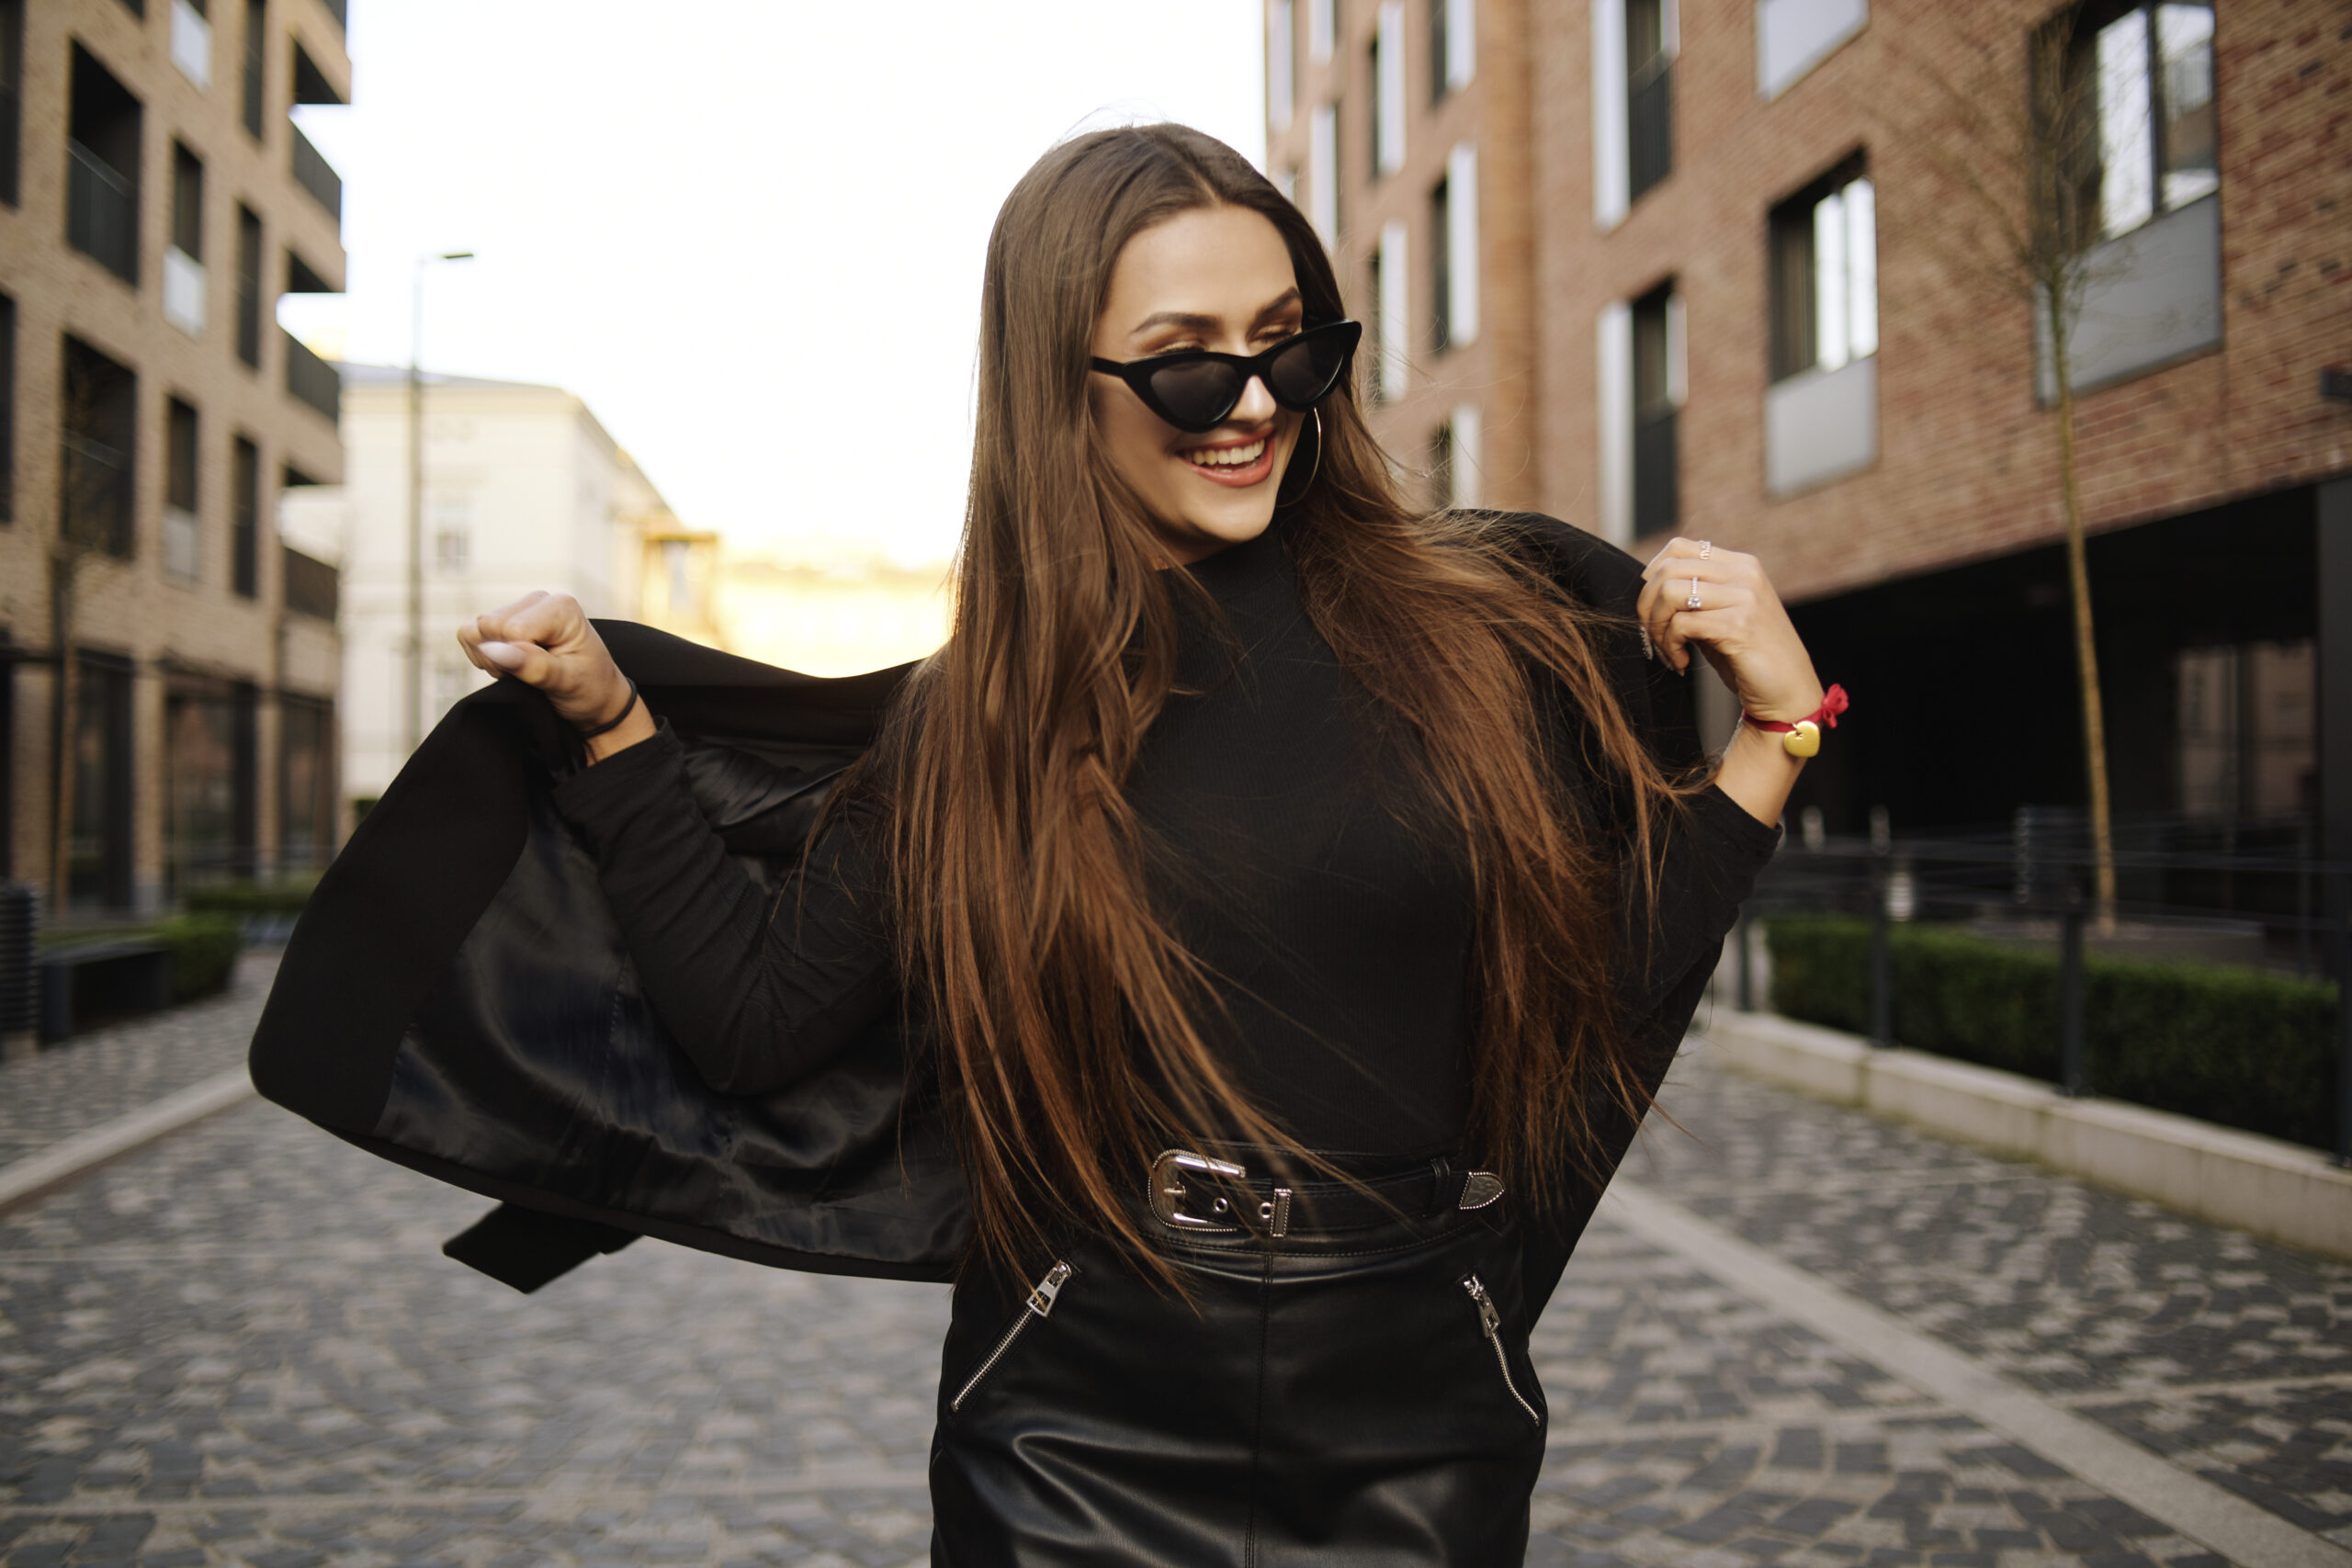 How to Wear Black Clothing Everyday – Outfit Ideas That Won’t Be Boring